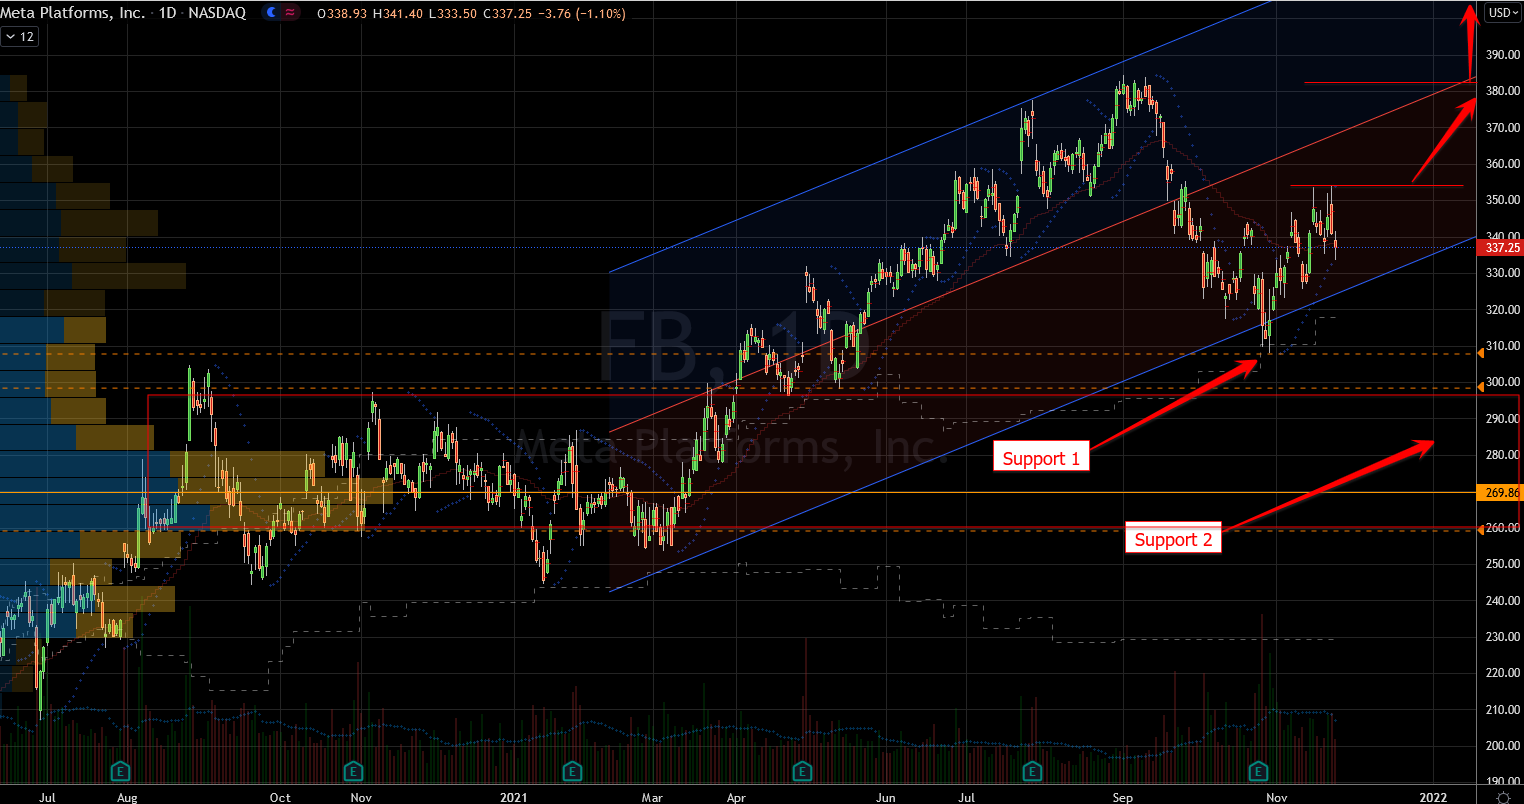 Facebook (FB) Stock Chart Showing Imprtant Levels